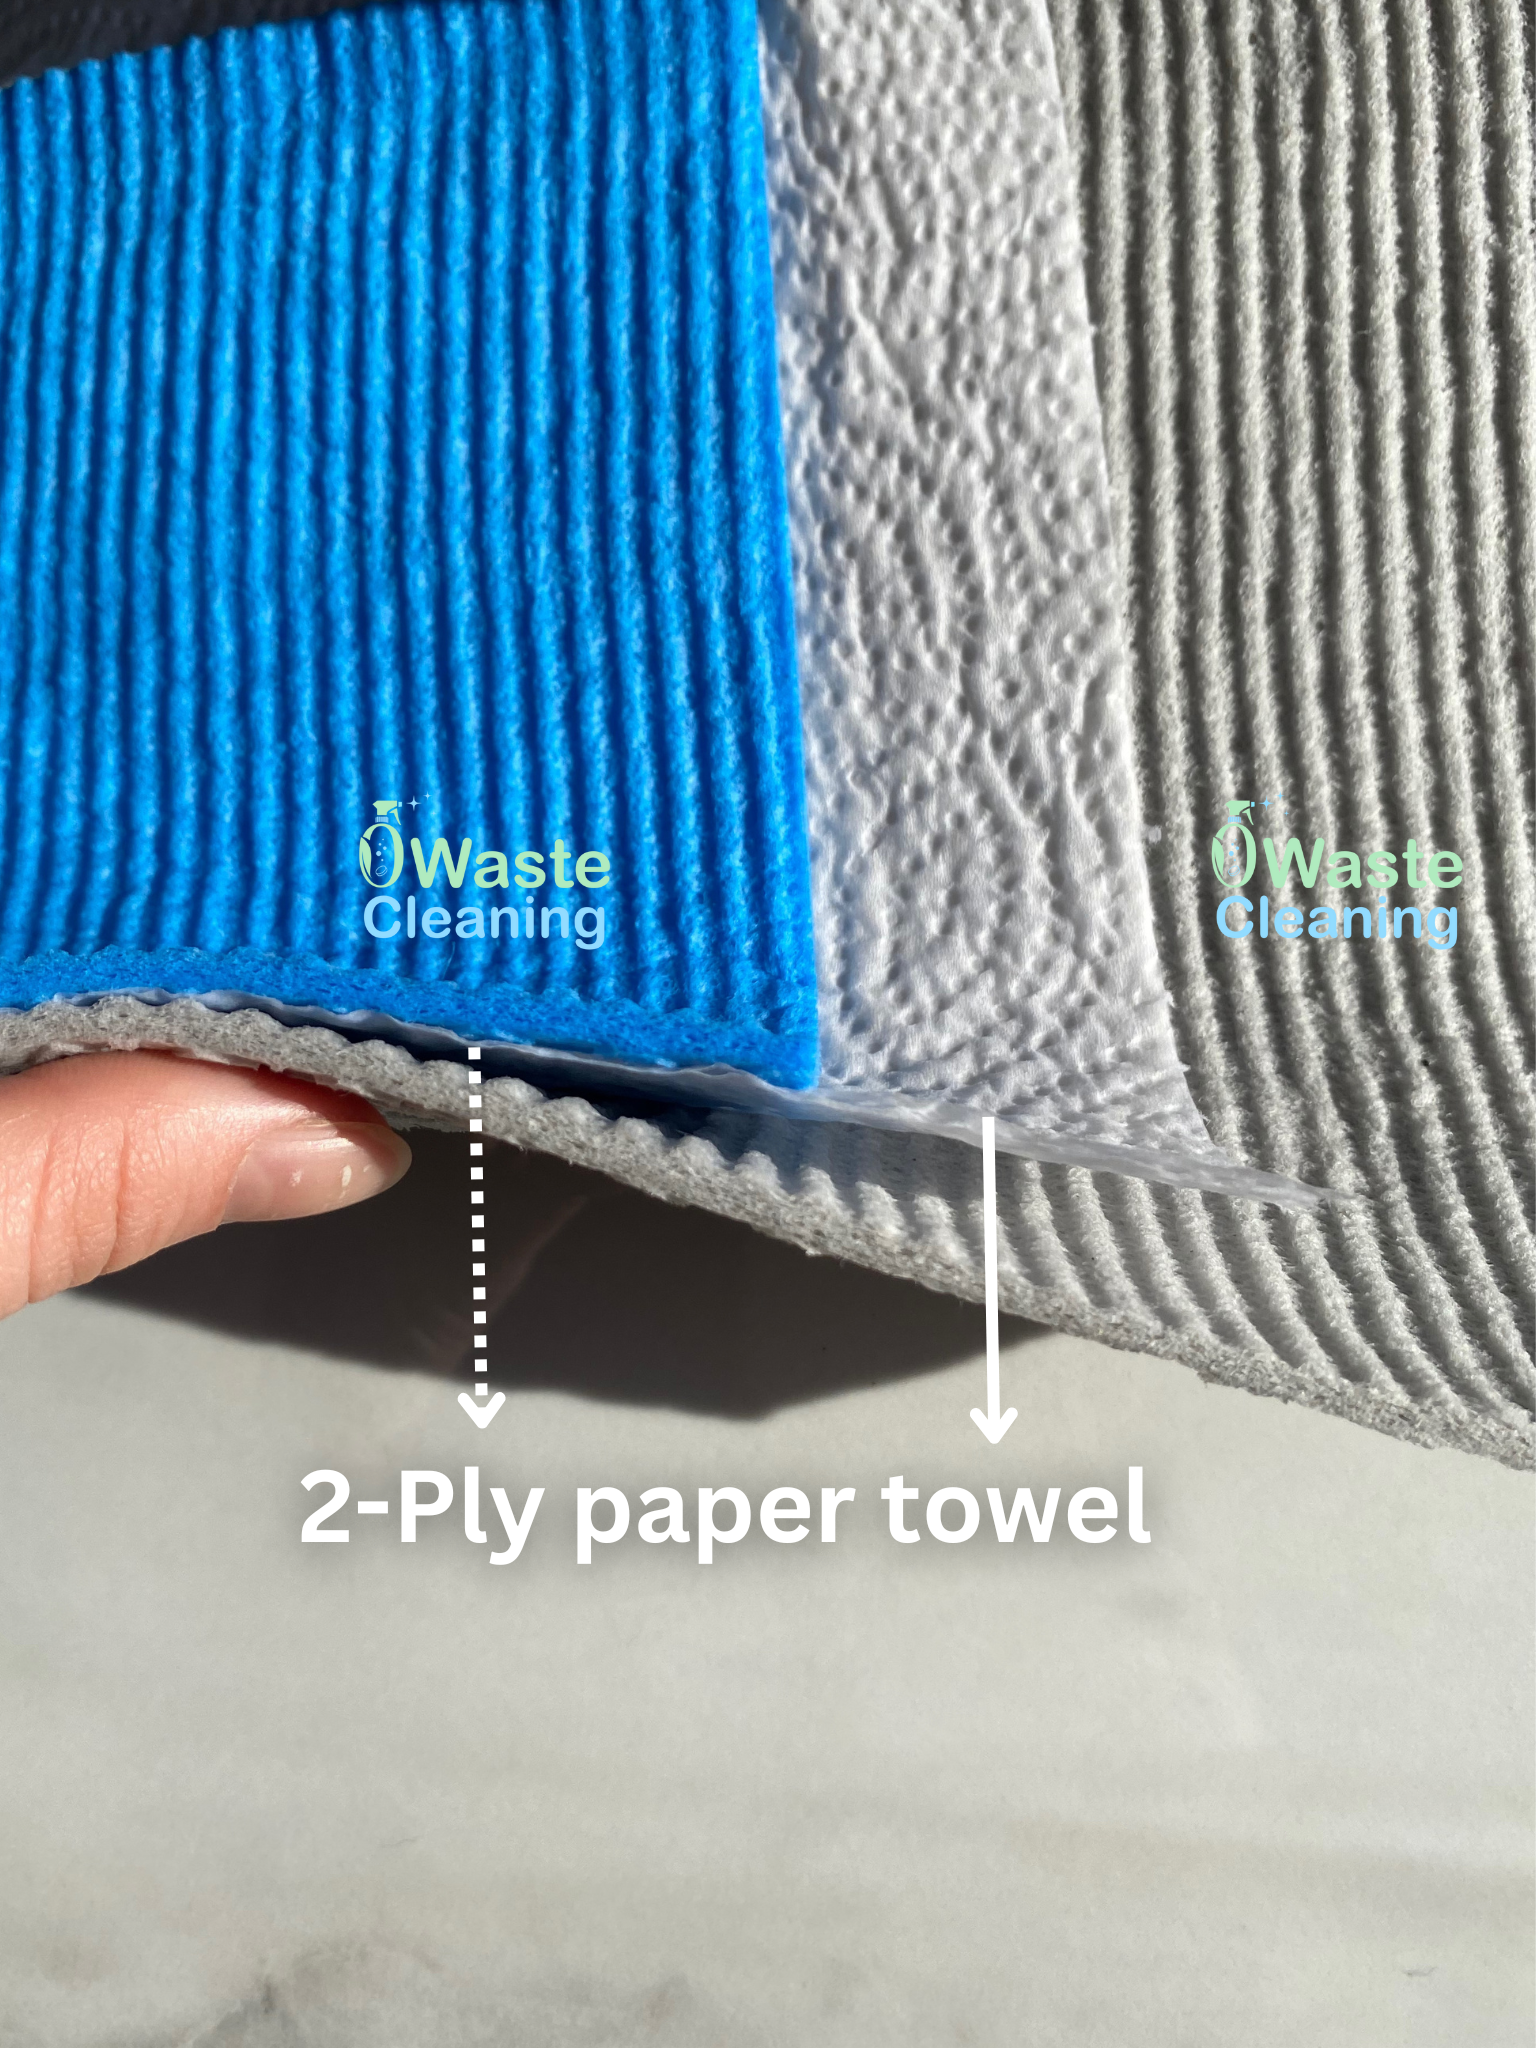 0wastecleaning Blue Planet reusable paper towel zero waste-sustainable-refill tablet  magasin zero dechet a Montreal vegan cleaner-pet friendly cleaner